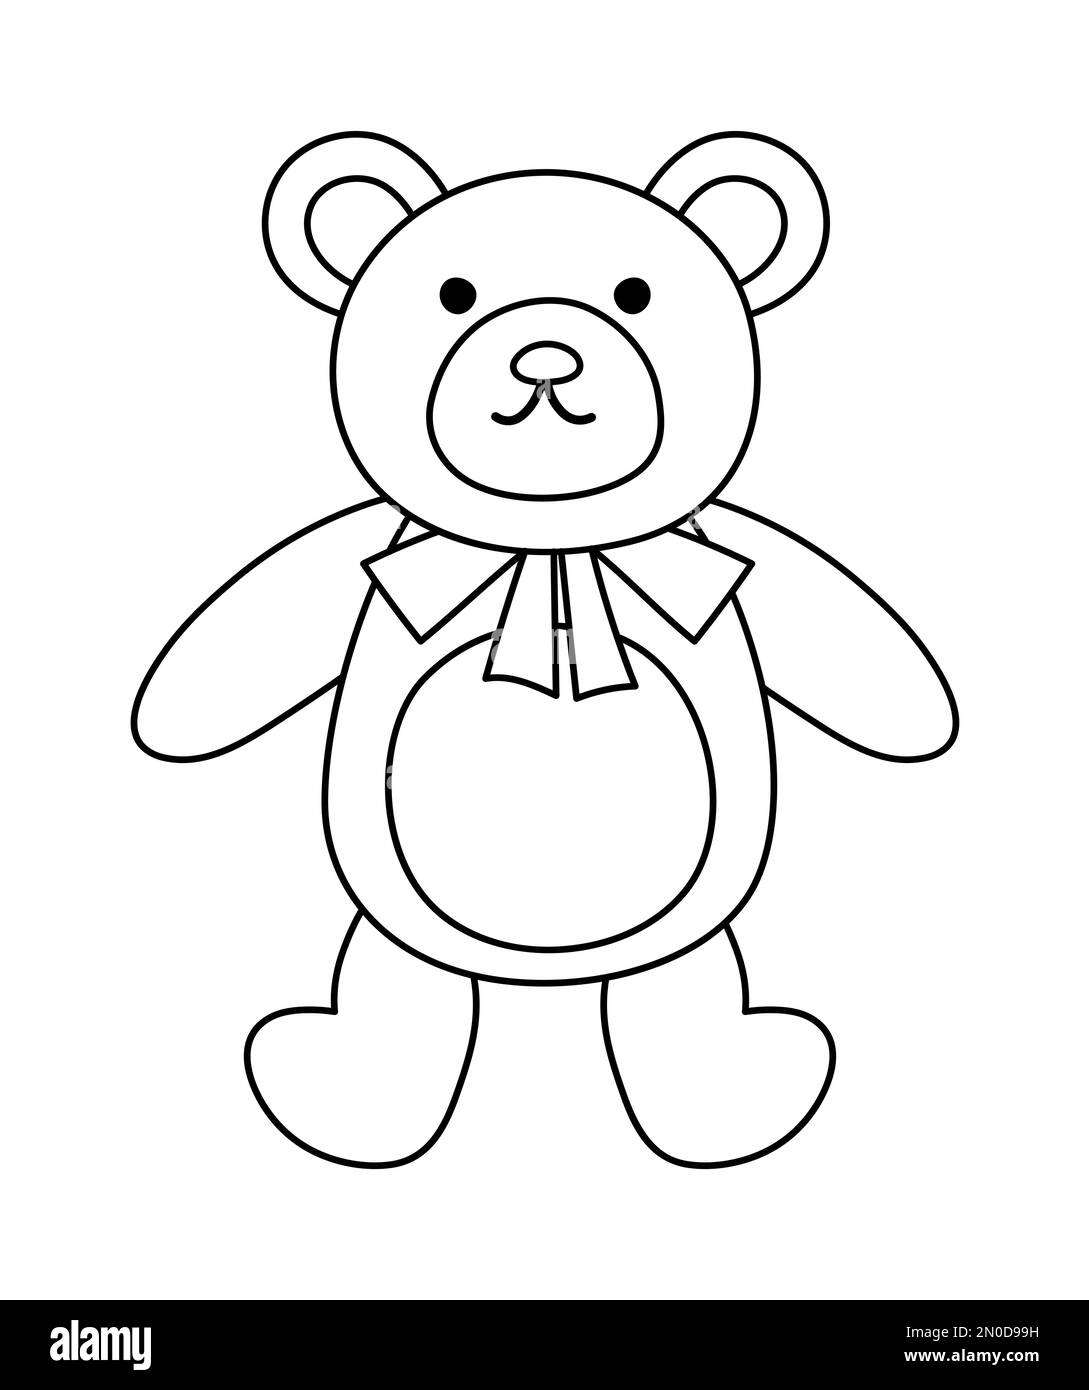 Vector black and white teddy bear isolated on white background. Cute toy animal illustration for kids. Funny smiling character line icon for children Stock Vector